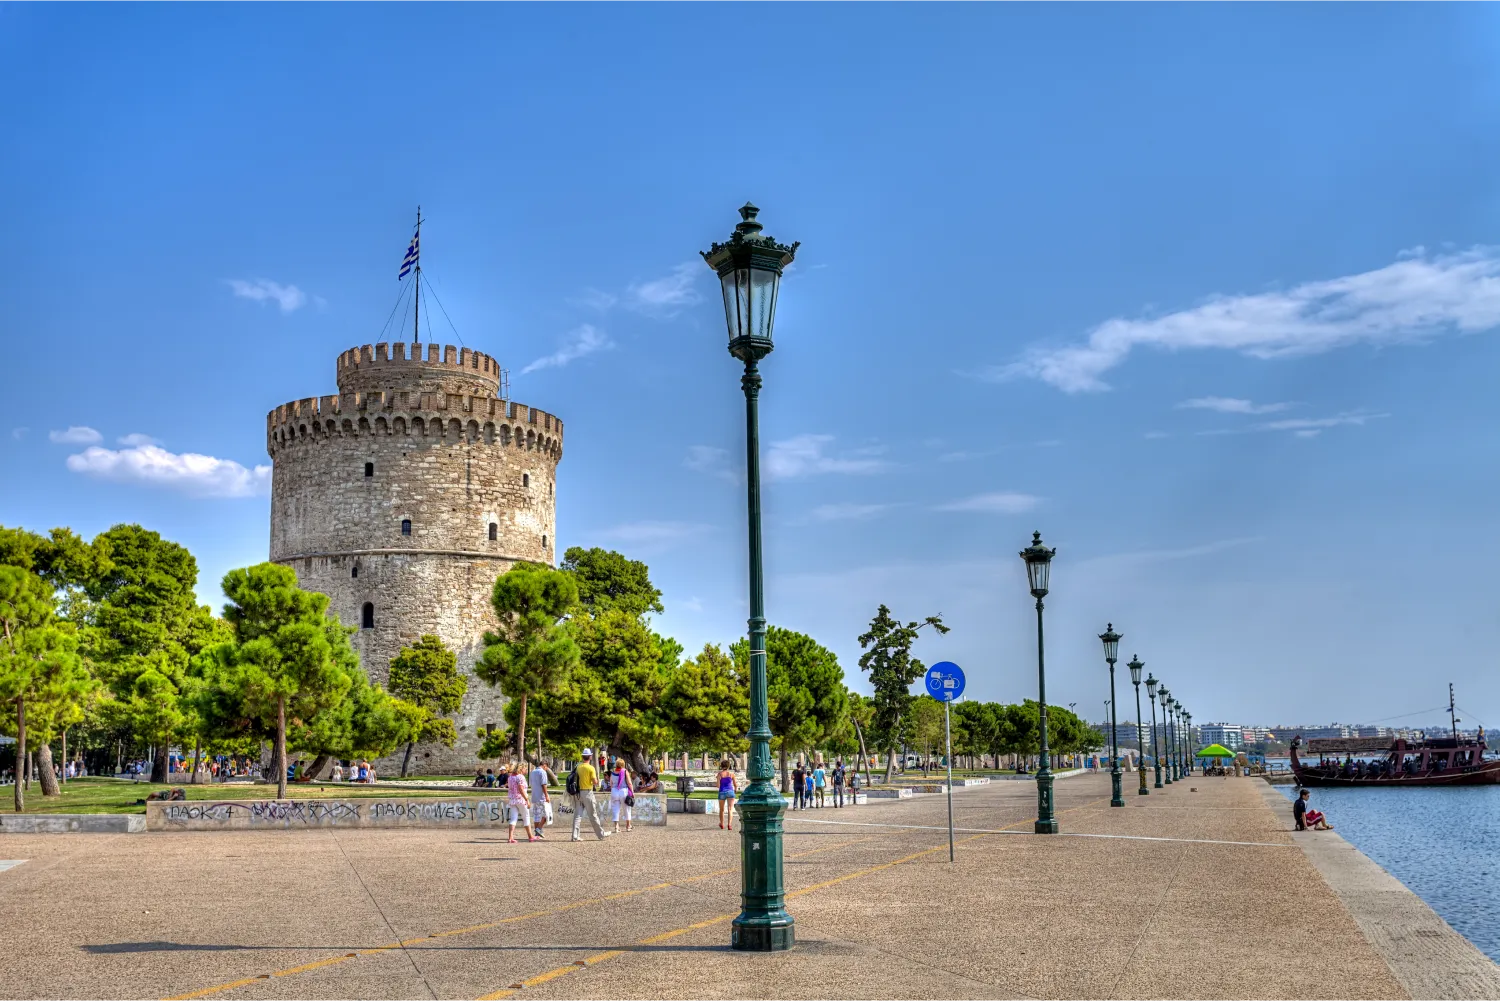 The beautiful promenade in the port of Thessaloniki next to the White Tower